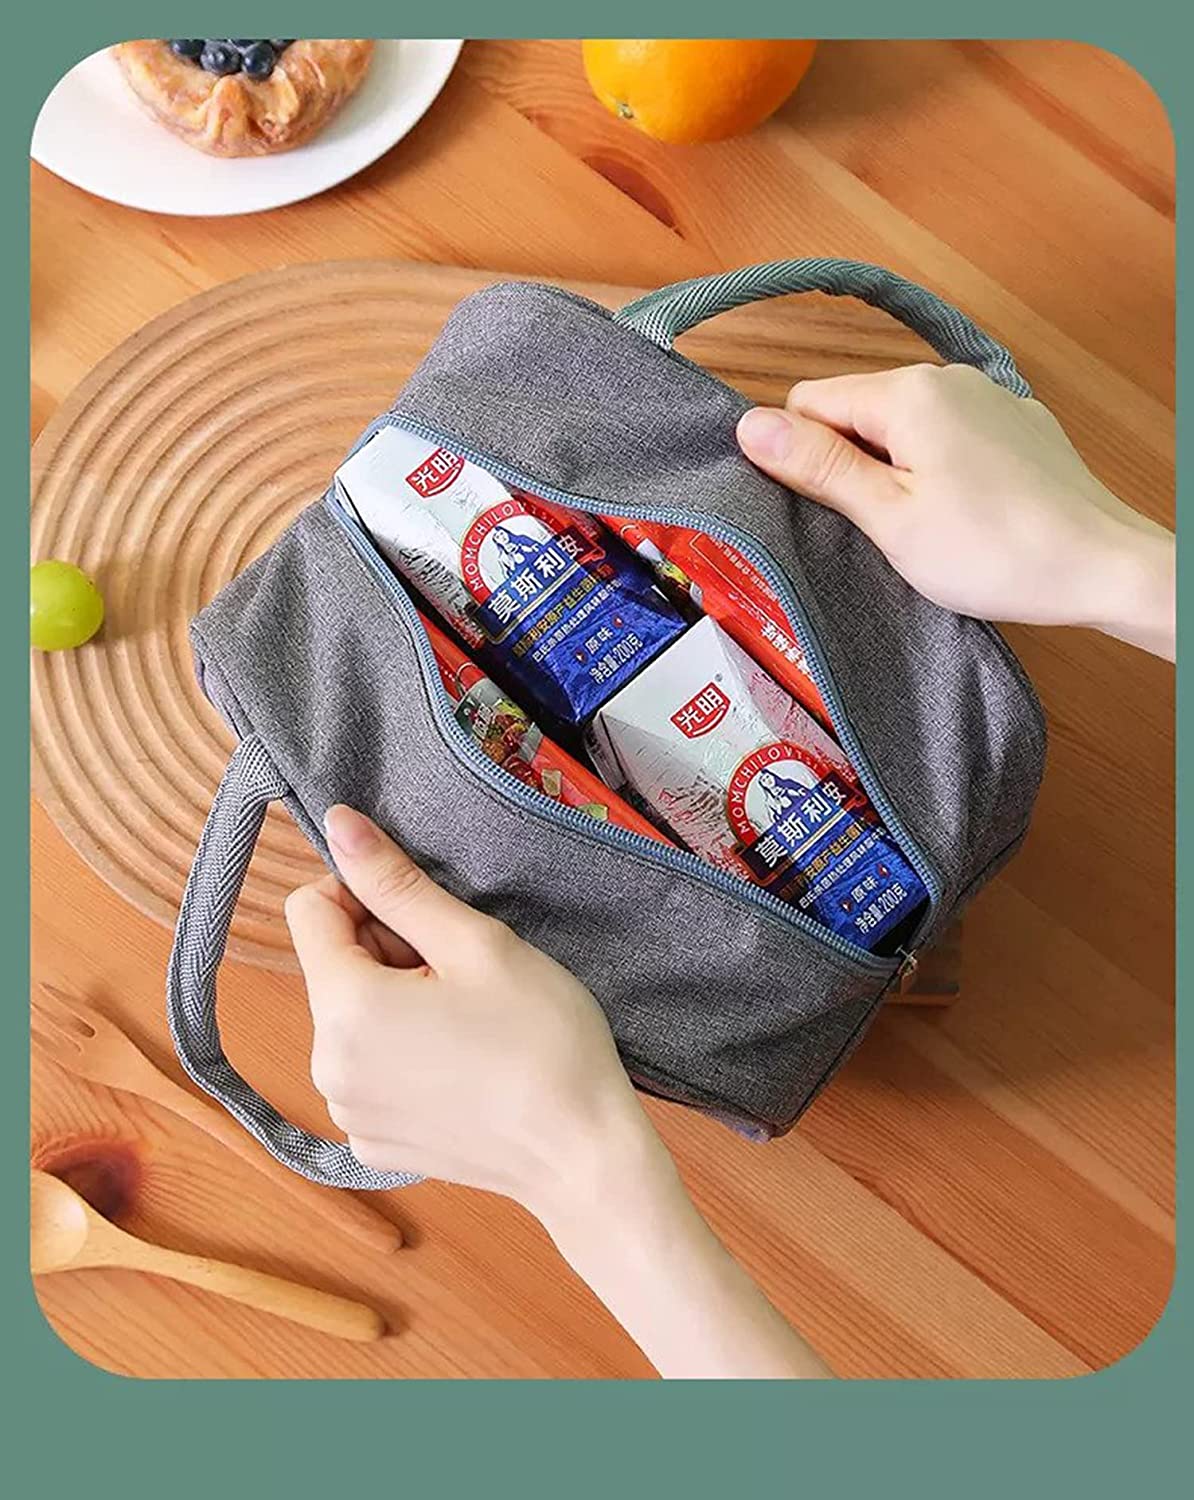 Insulated Reusable Lunch Bag